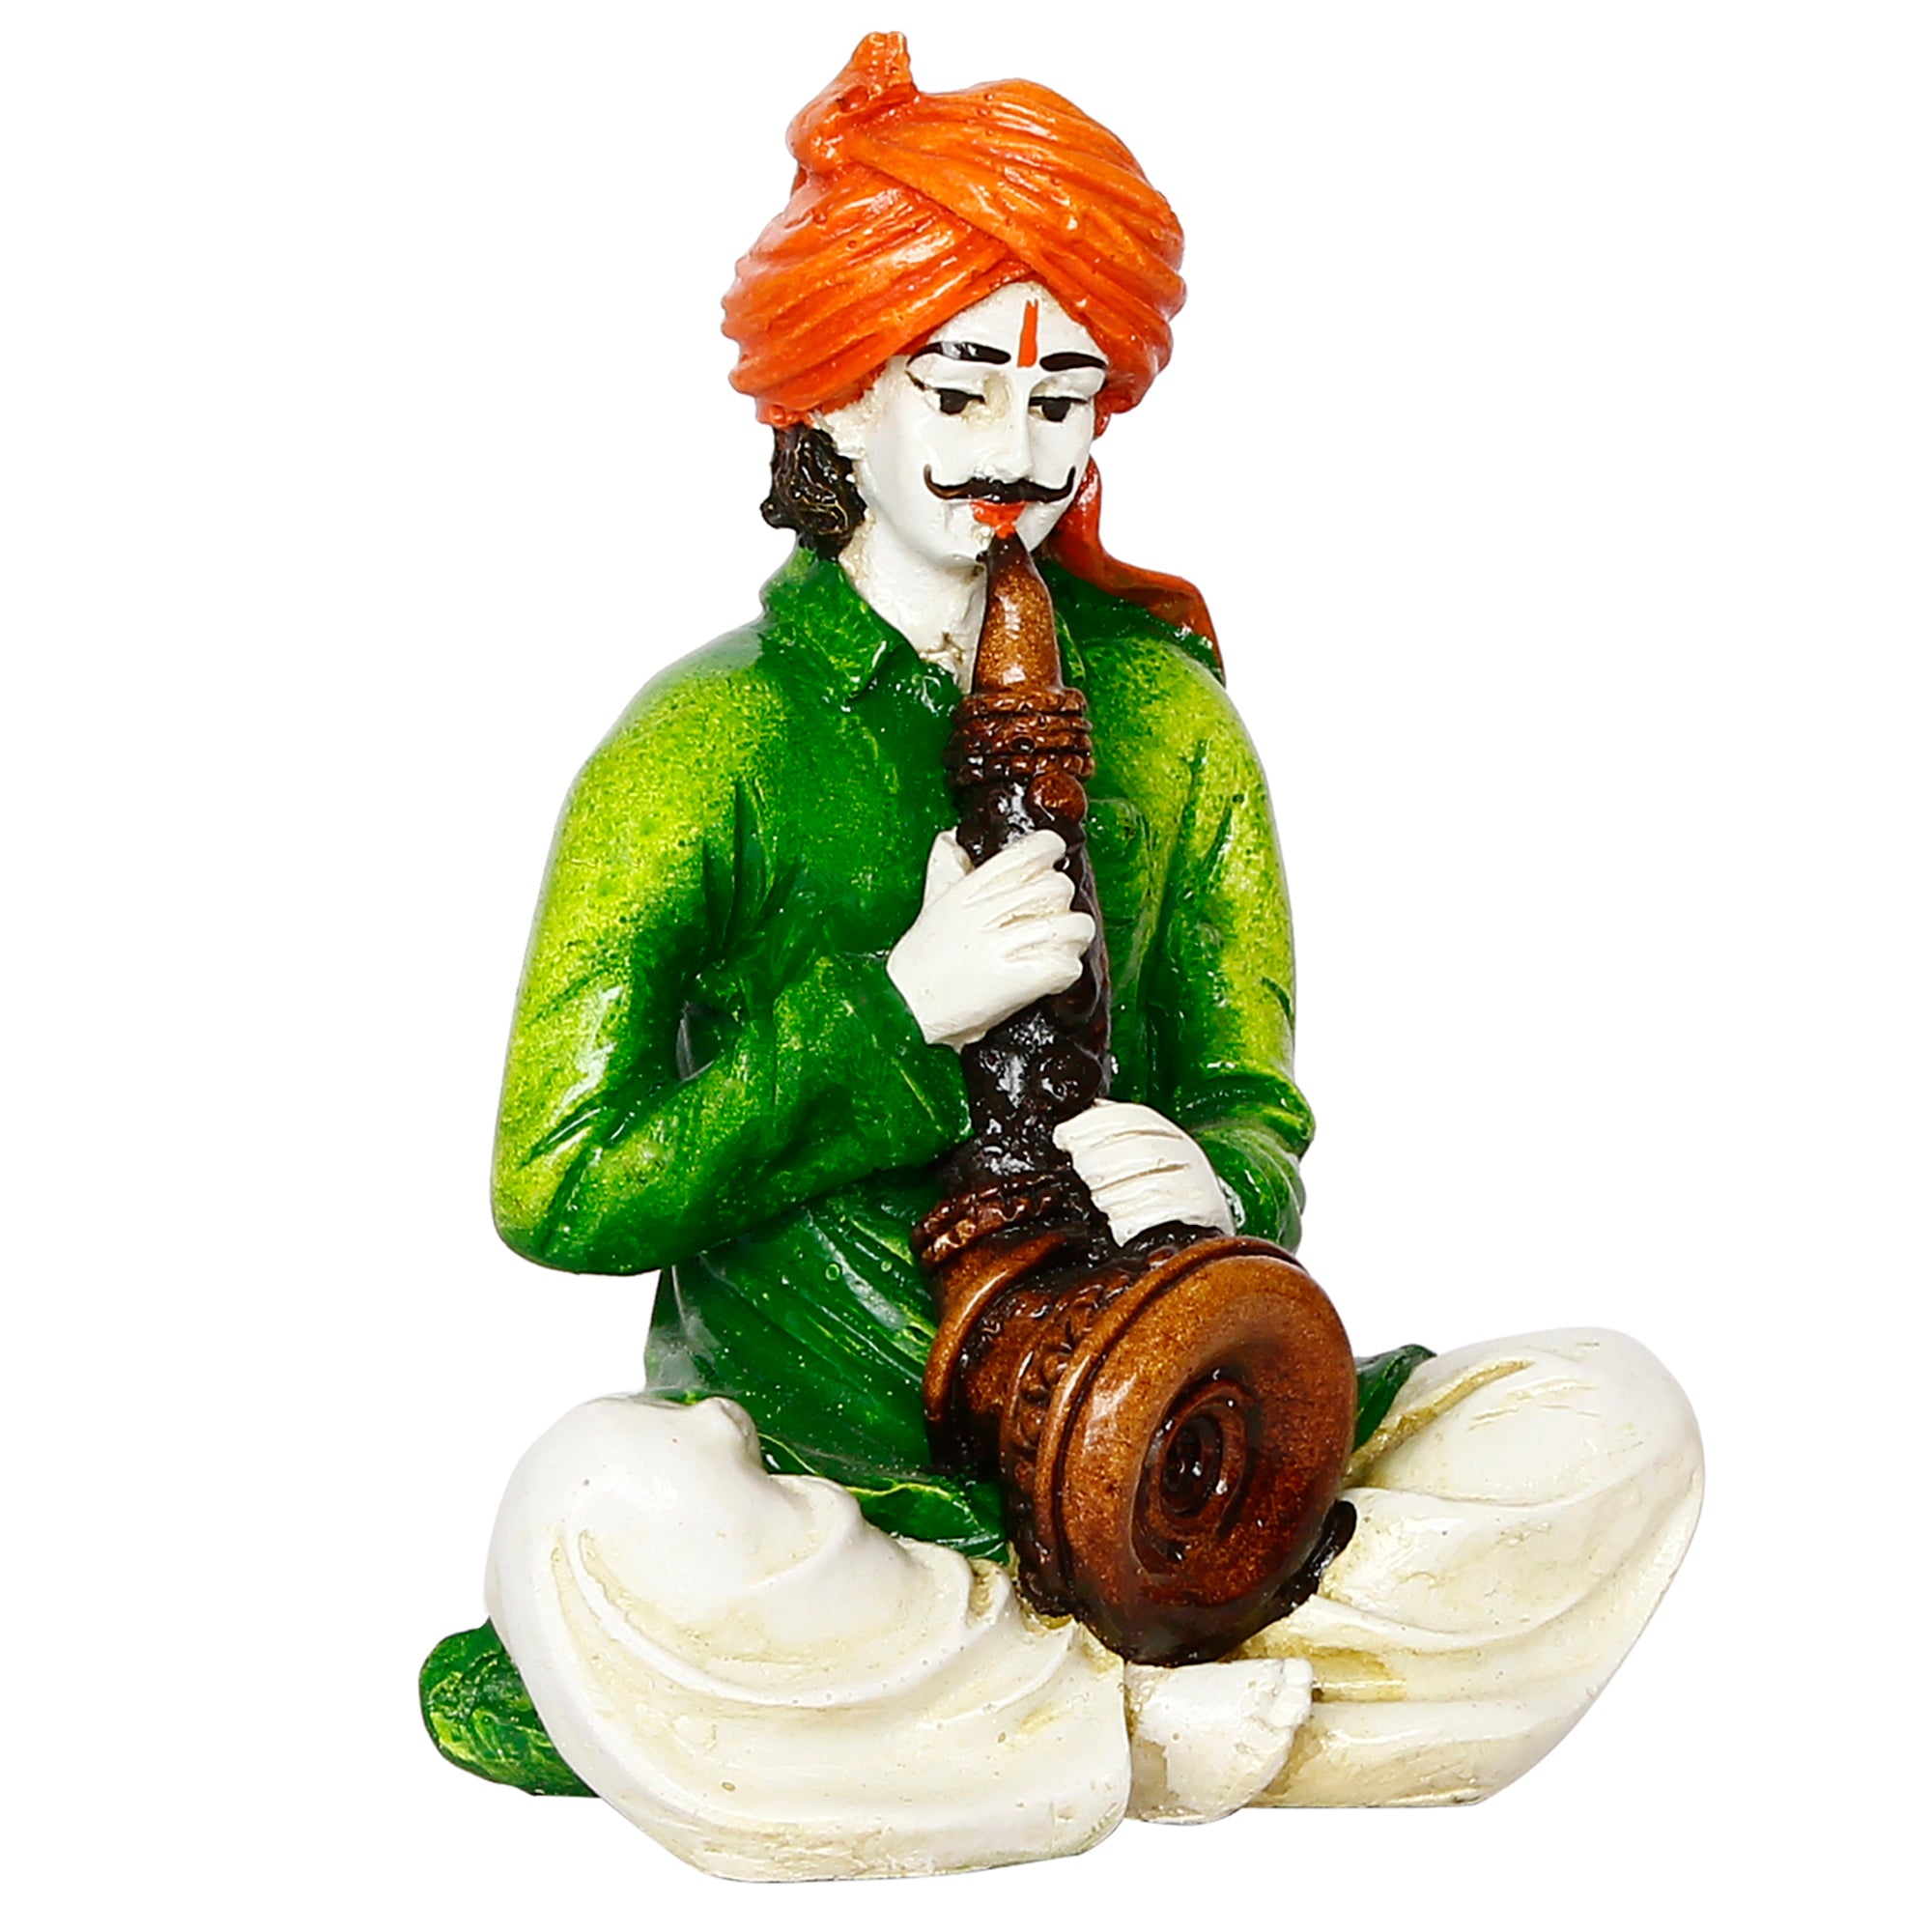 Polyresin Rajasthani Musician Men Statue Playing Musical Instrument Human Figurines Home Decor Showpiece 2